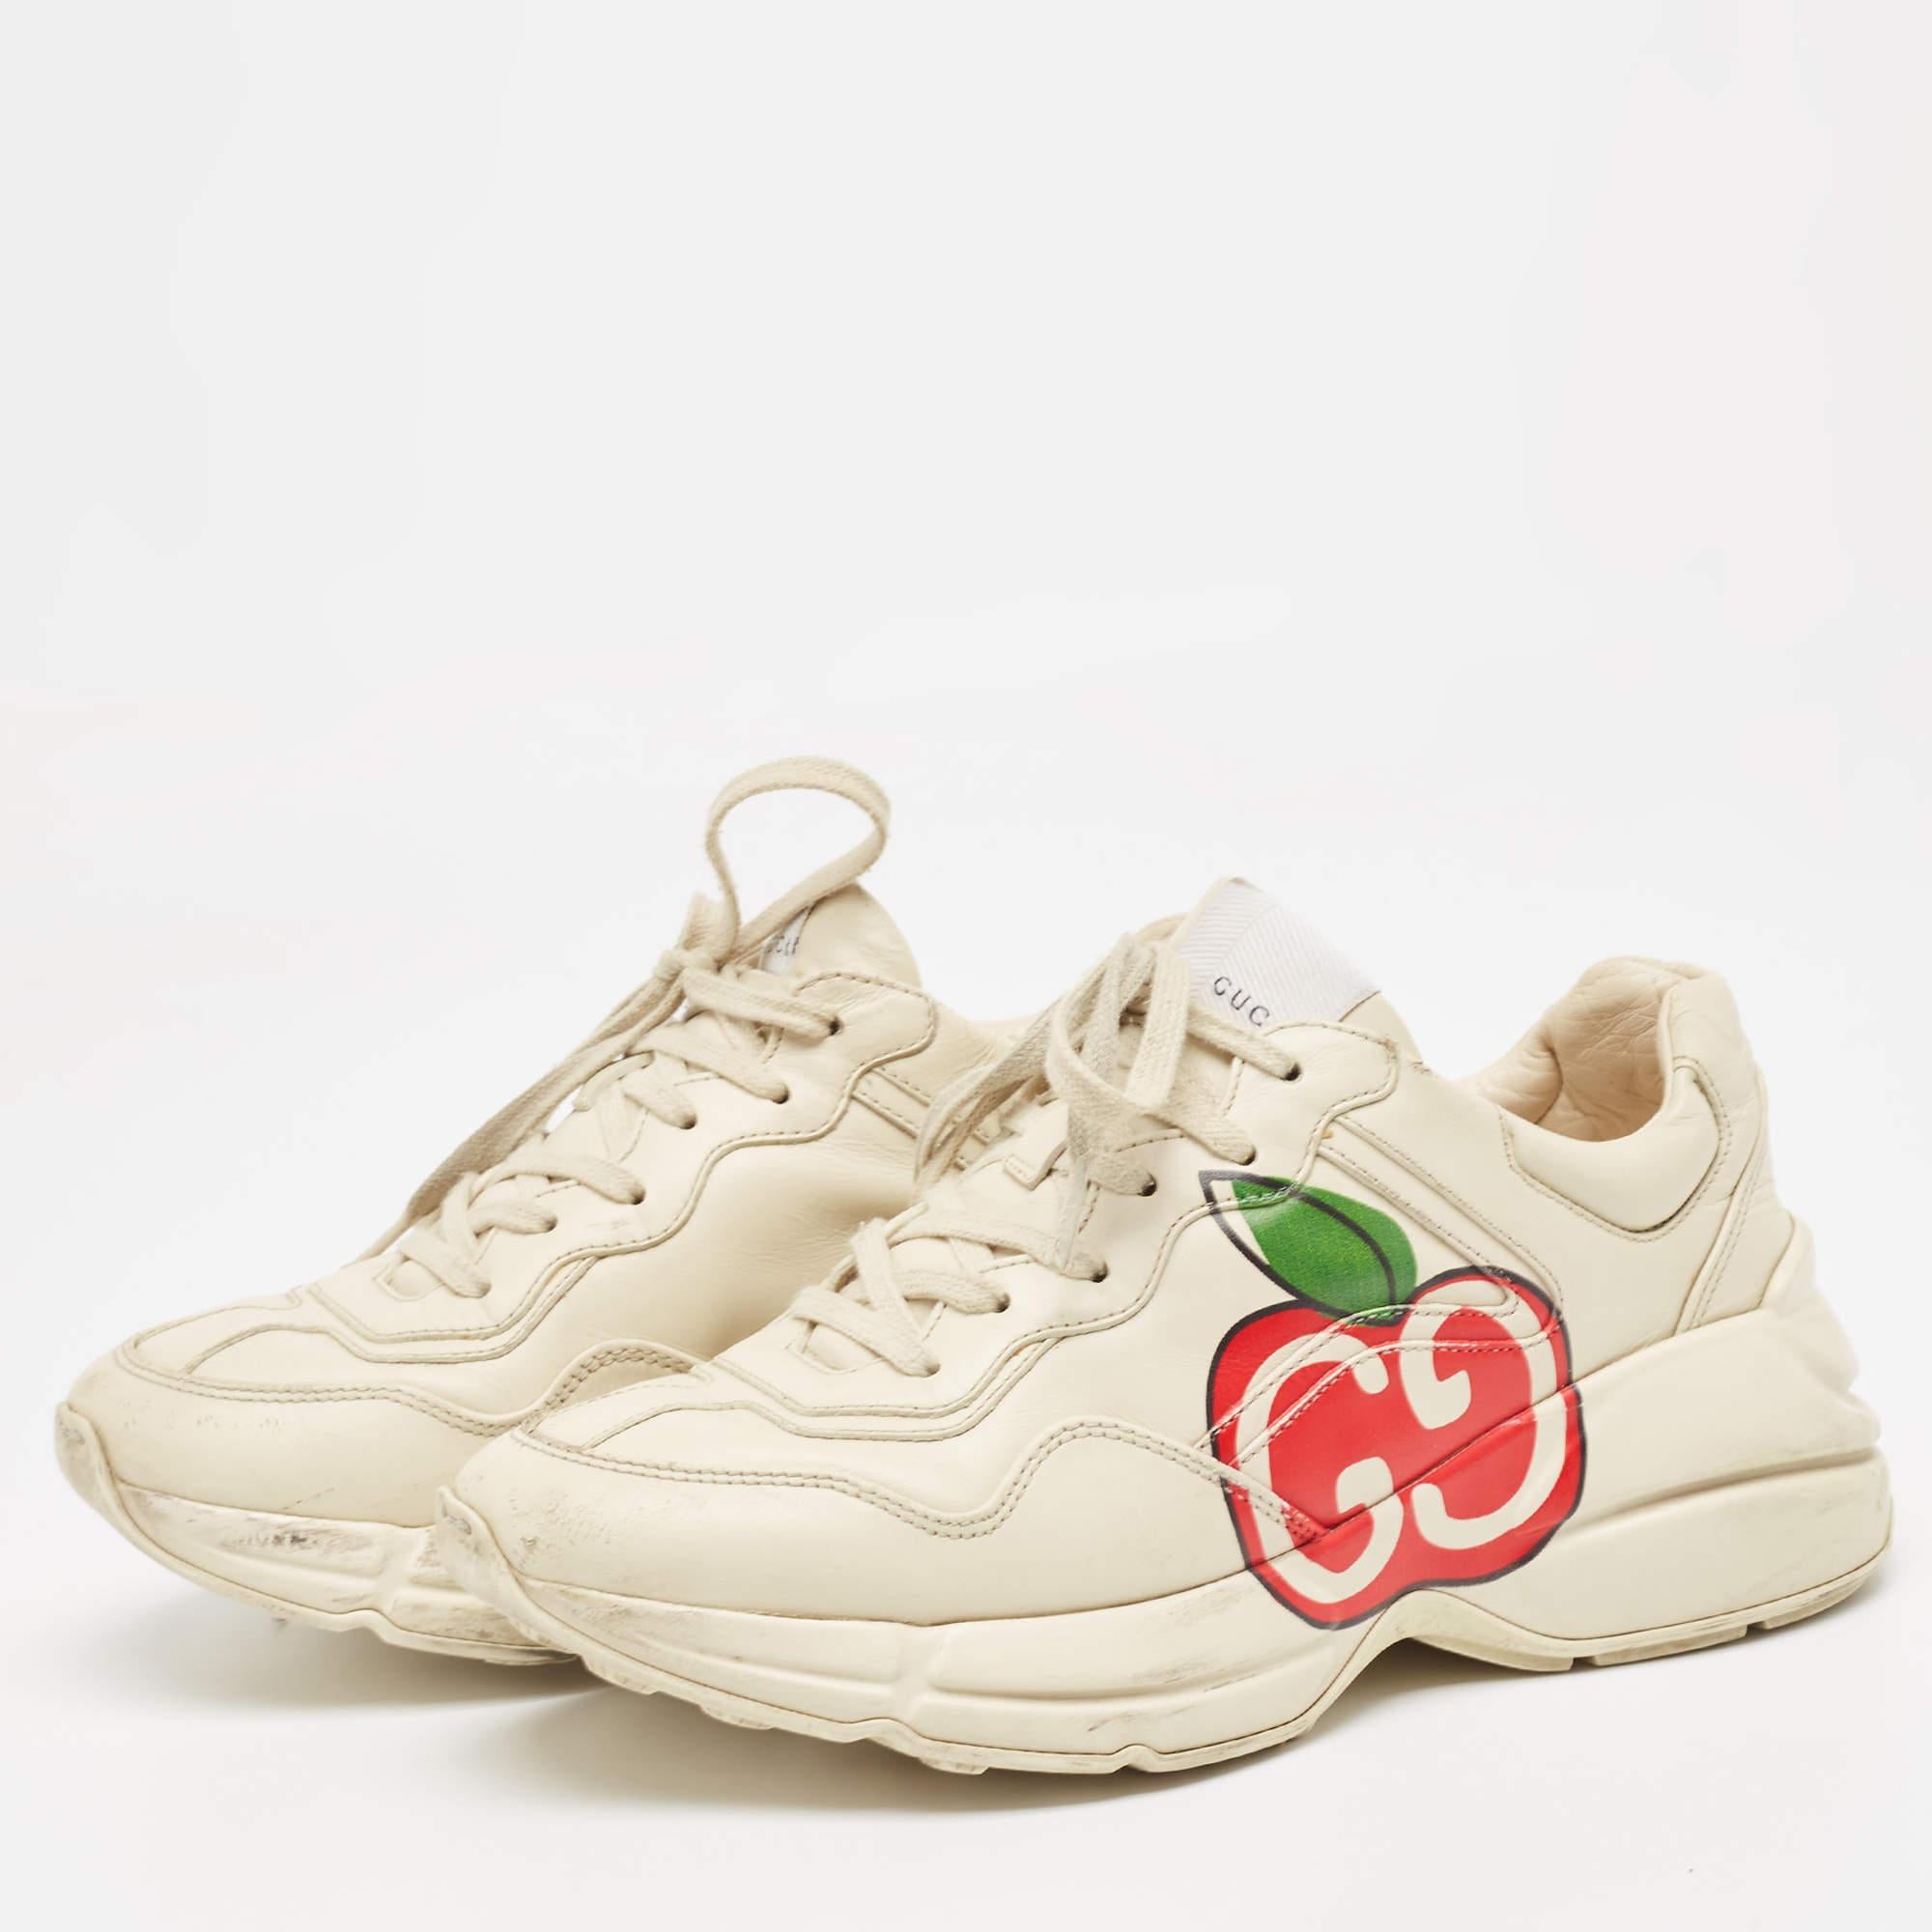 Gucci Cream Leather GG Apple Rhyton Sneakers Size 39 For Sale 2